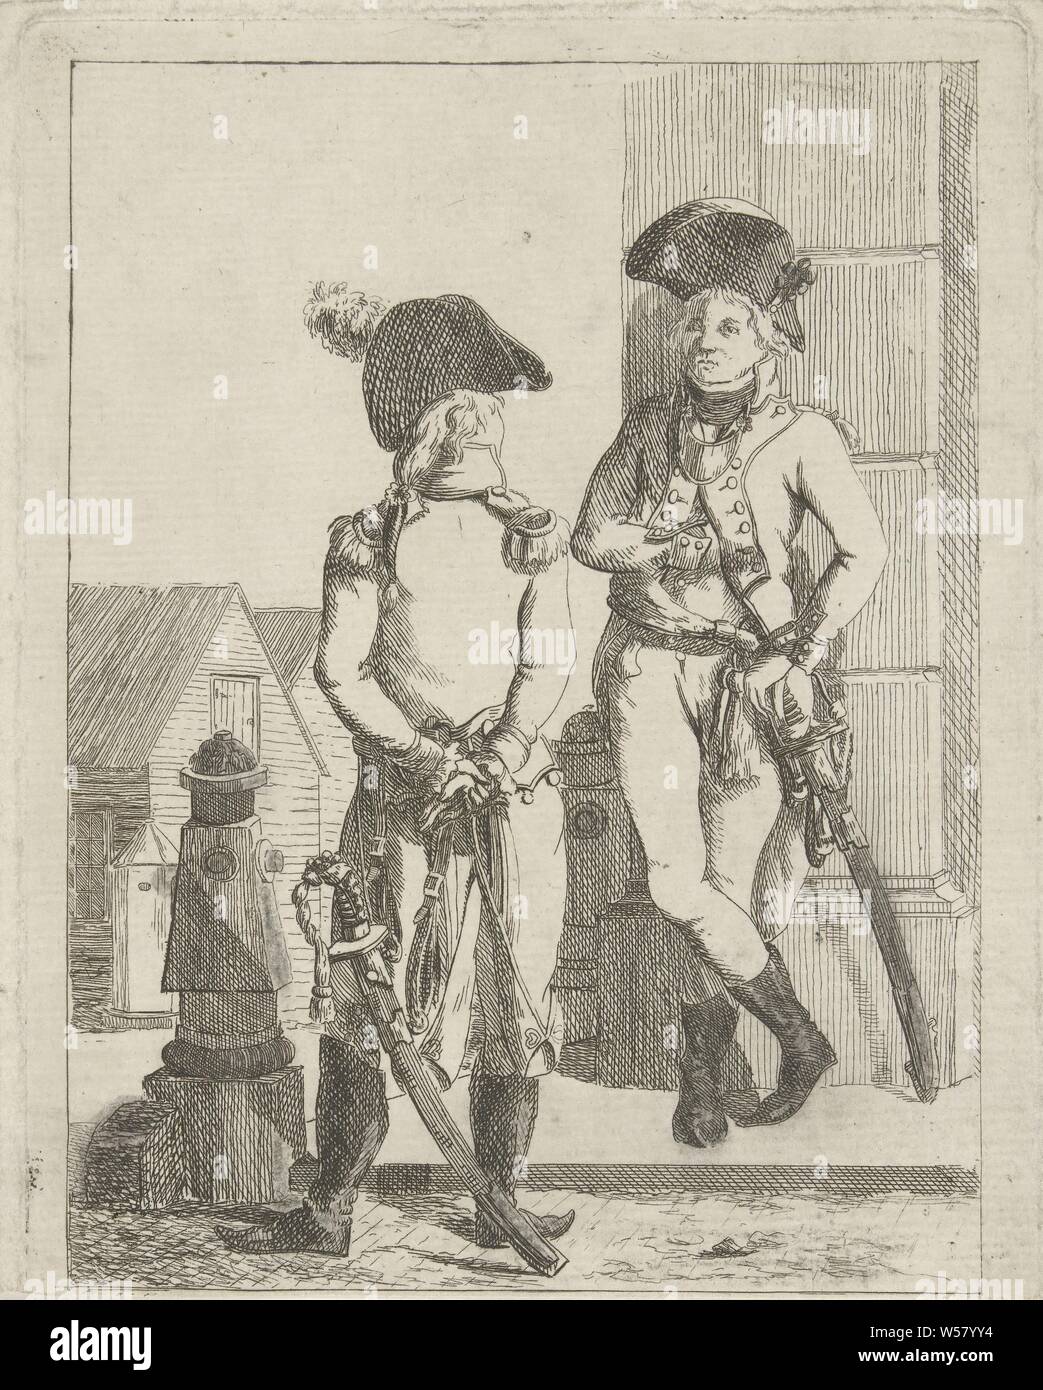 Armed Civil Force Rotterdam, Burgermacht Rotterdam 1795, artillery officer. Two soldiers are having a conversation on the street. Both wear a saber on their belt., The soldier, the soldier's life, hacking and thrusting weapons: sword, Rotterdam, Jan Anthonie Langendijk Dzn, 1795 - 1818, paper, etching, h 146 mm × w 115 mm Stock Photo